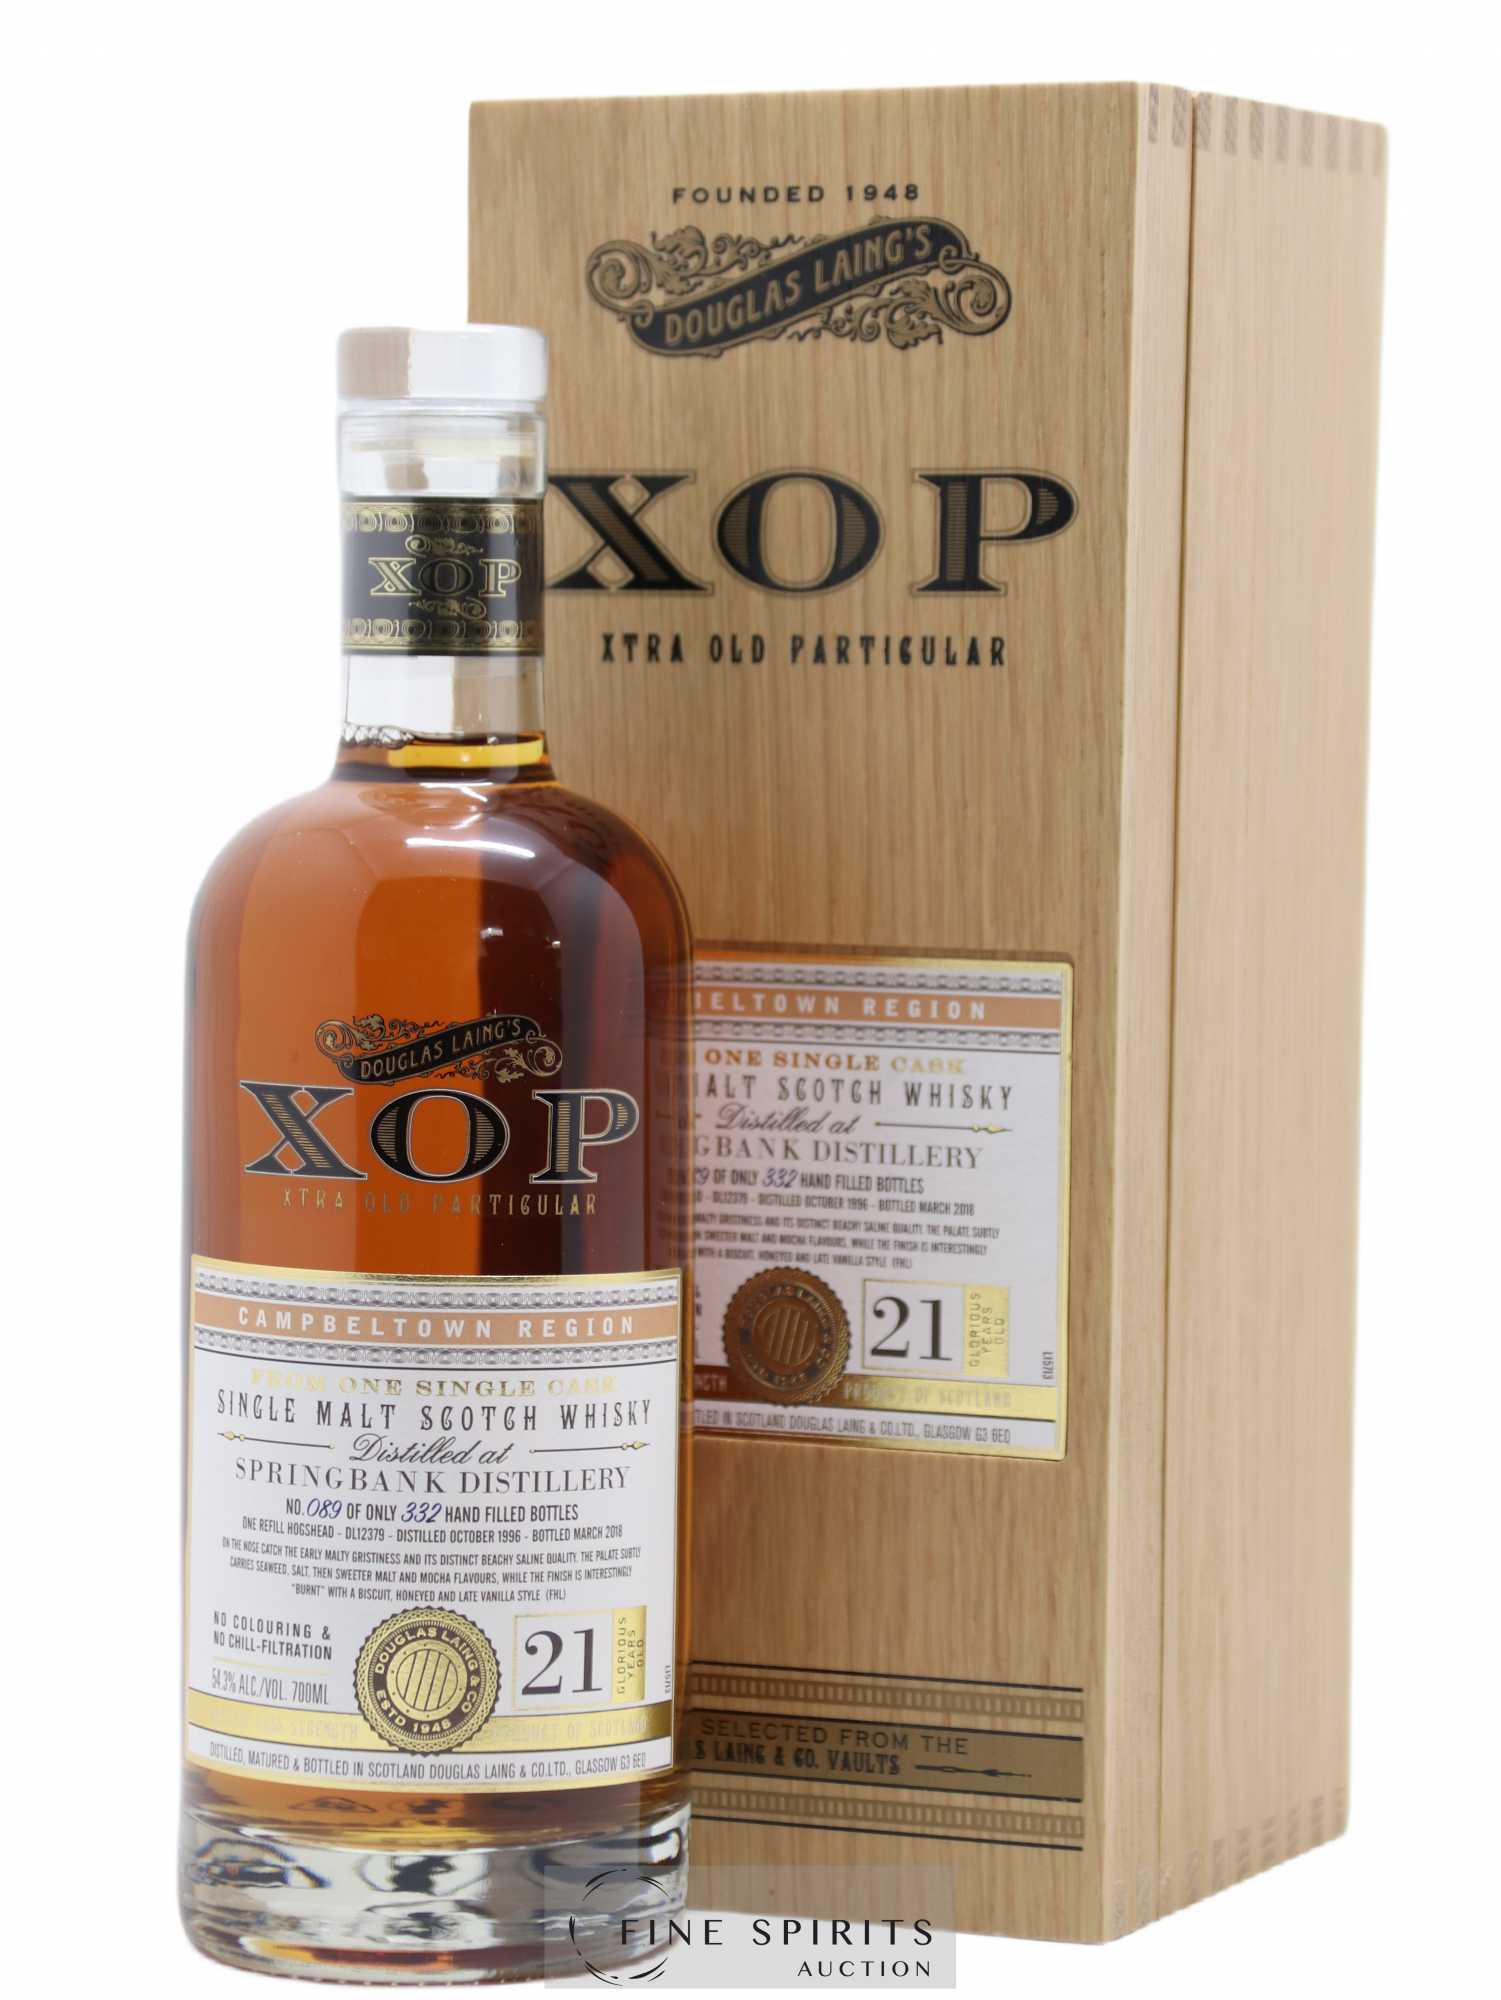 Springbank 21 years 1996 Douglas Laing Hogshead n°DL12379 - One of 332 - bottled 2018 Xtra Old Particular 